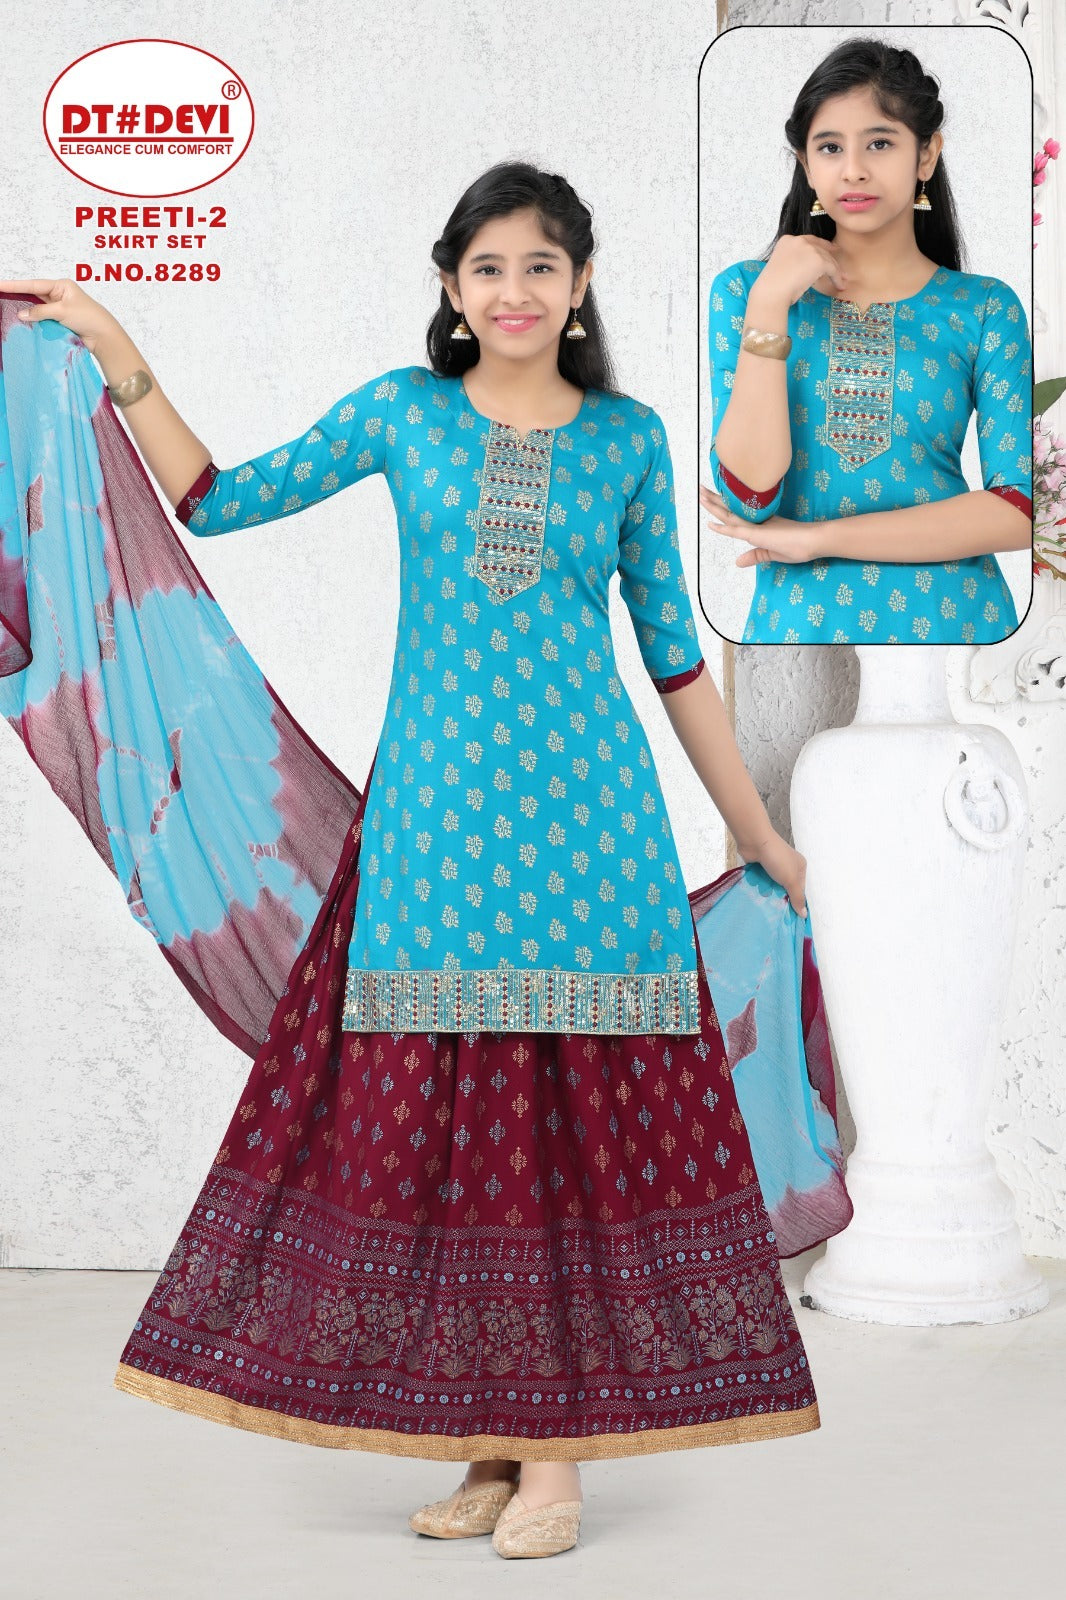 Preeti Vol 2-8289 Dt Devi Rayon Girls Readymade Skirt Style Suits